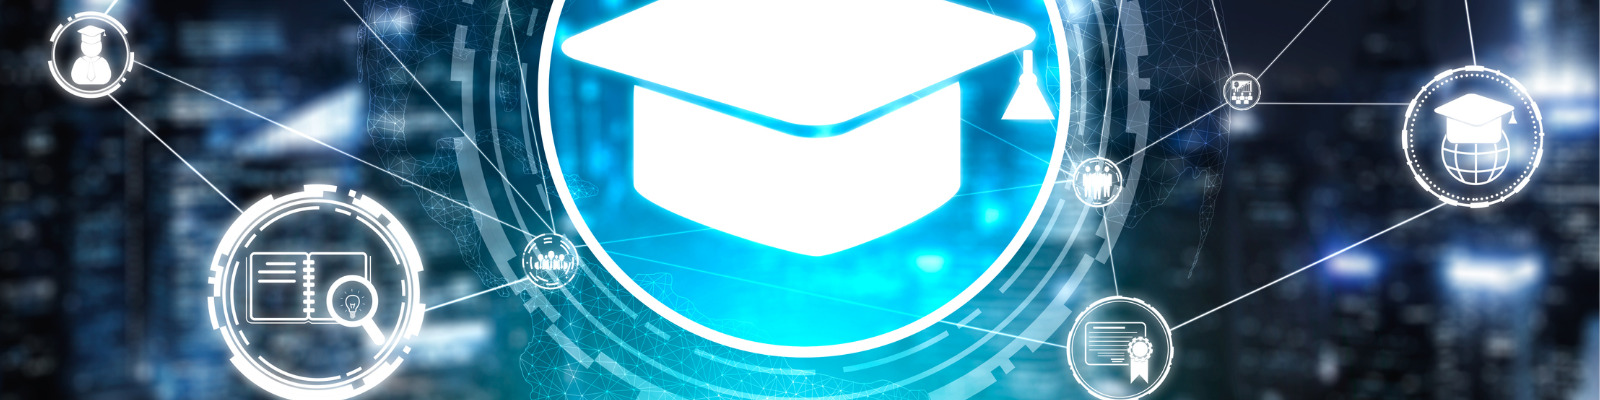 White mortarboard on blue background with lines showing connections to images representing education